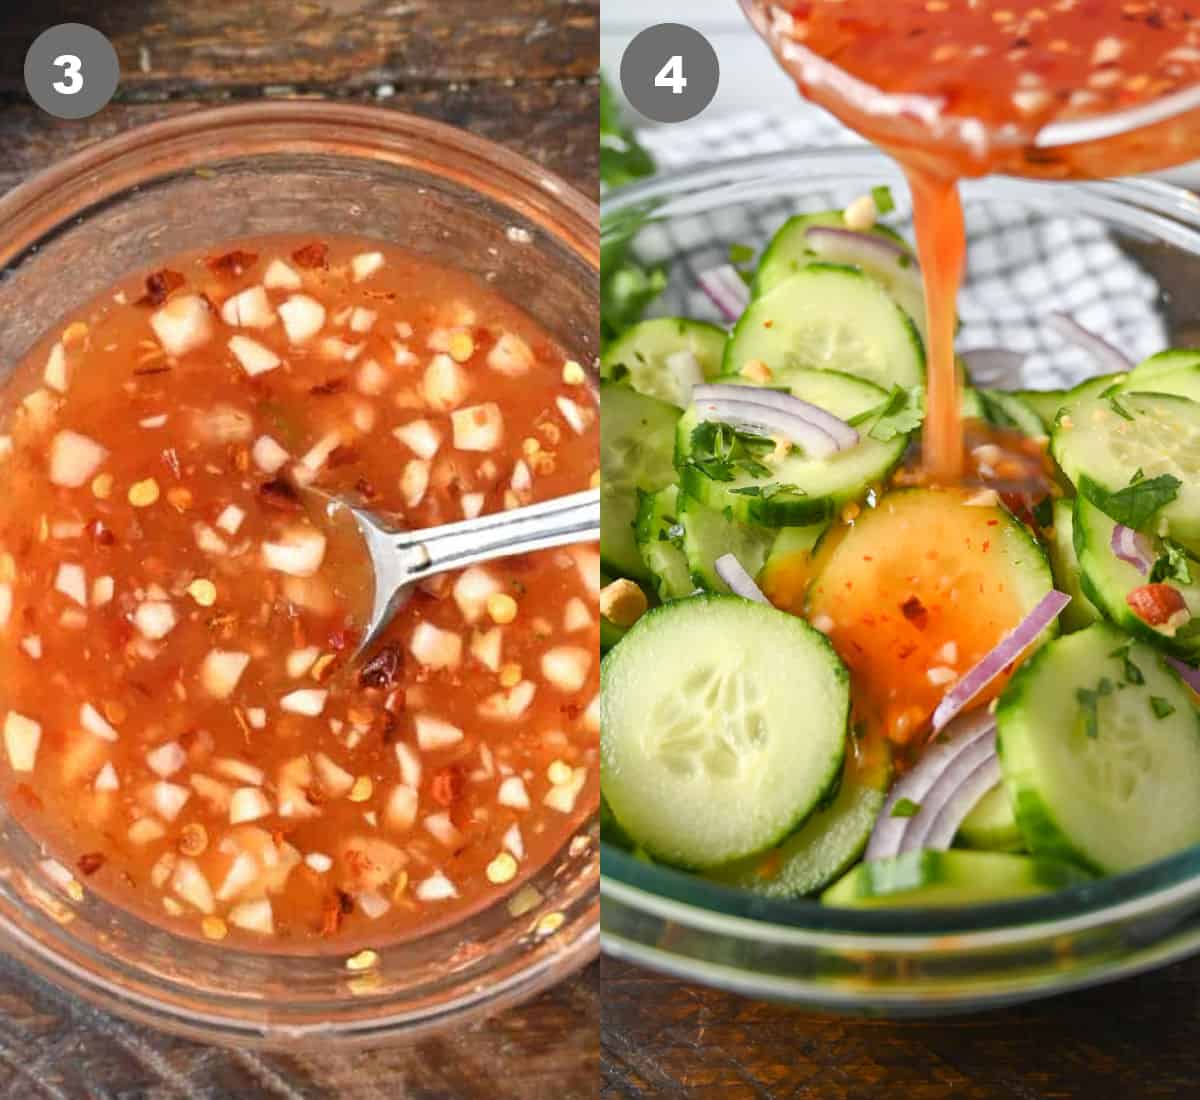 Dressing mixed in a small bowl then poured on top of sliced cucumbers.